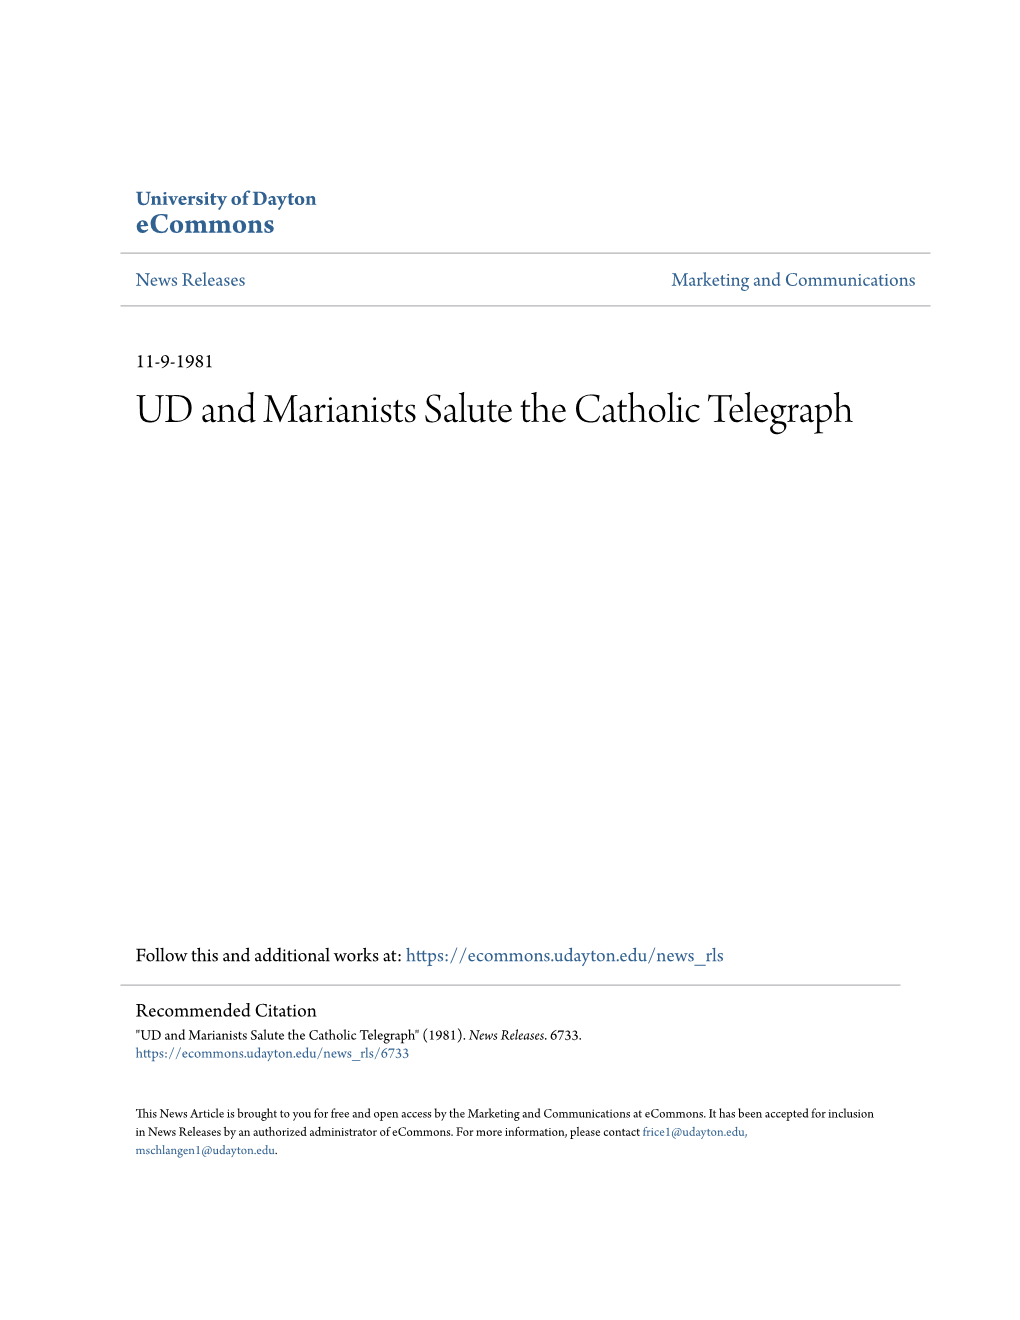 UD and Marianists Salute the Catholic Telegraph